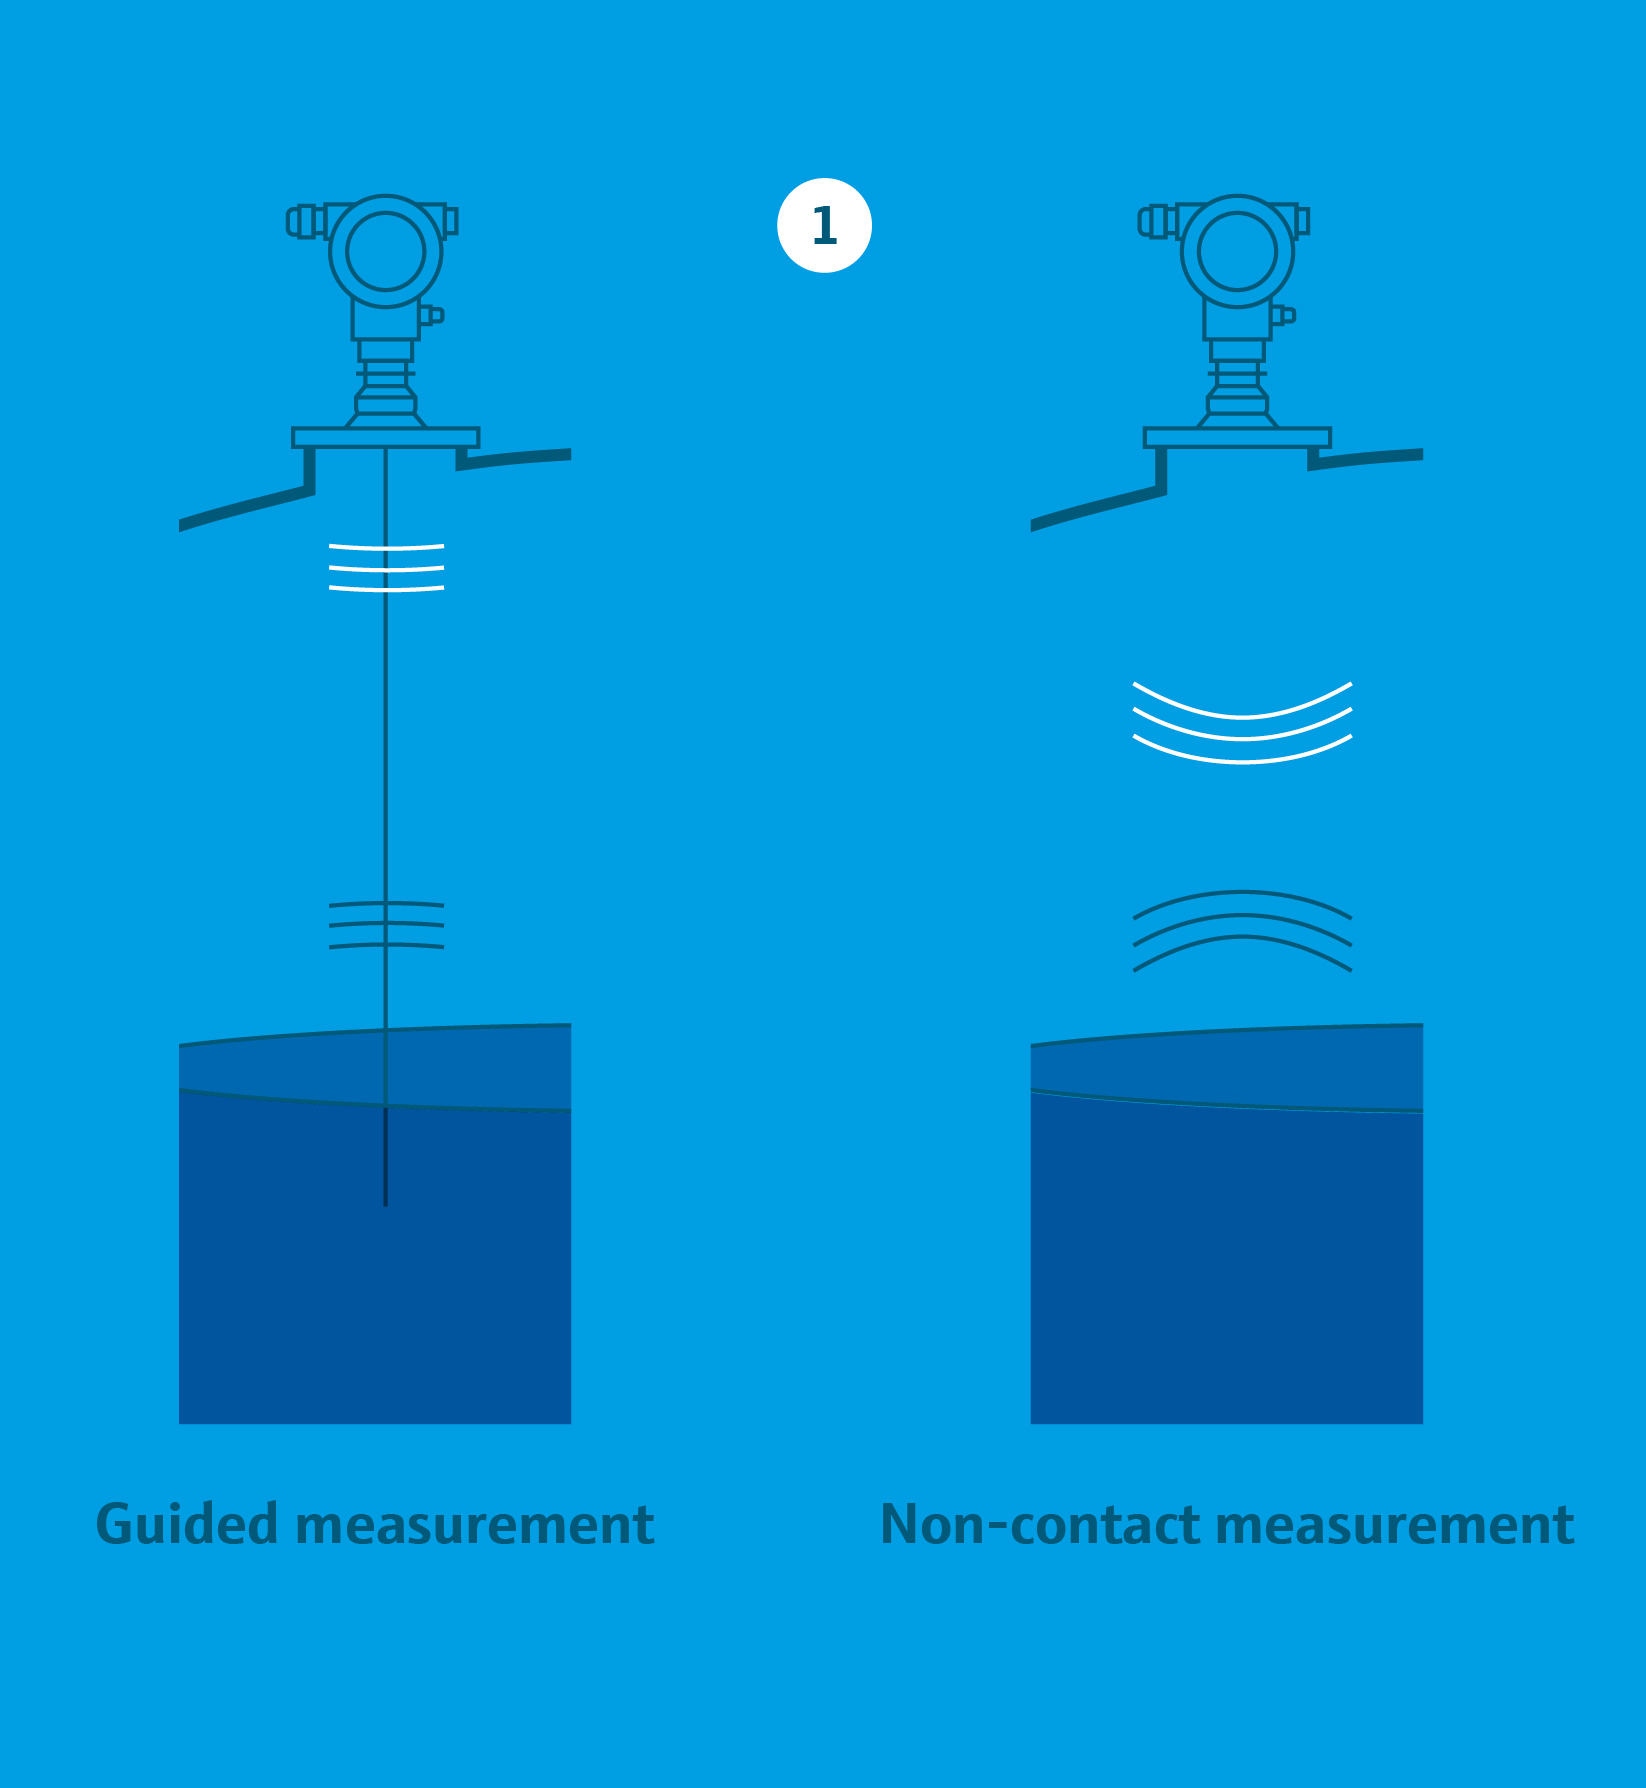 Guided measurement and Non-contact measurement